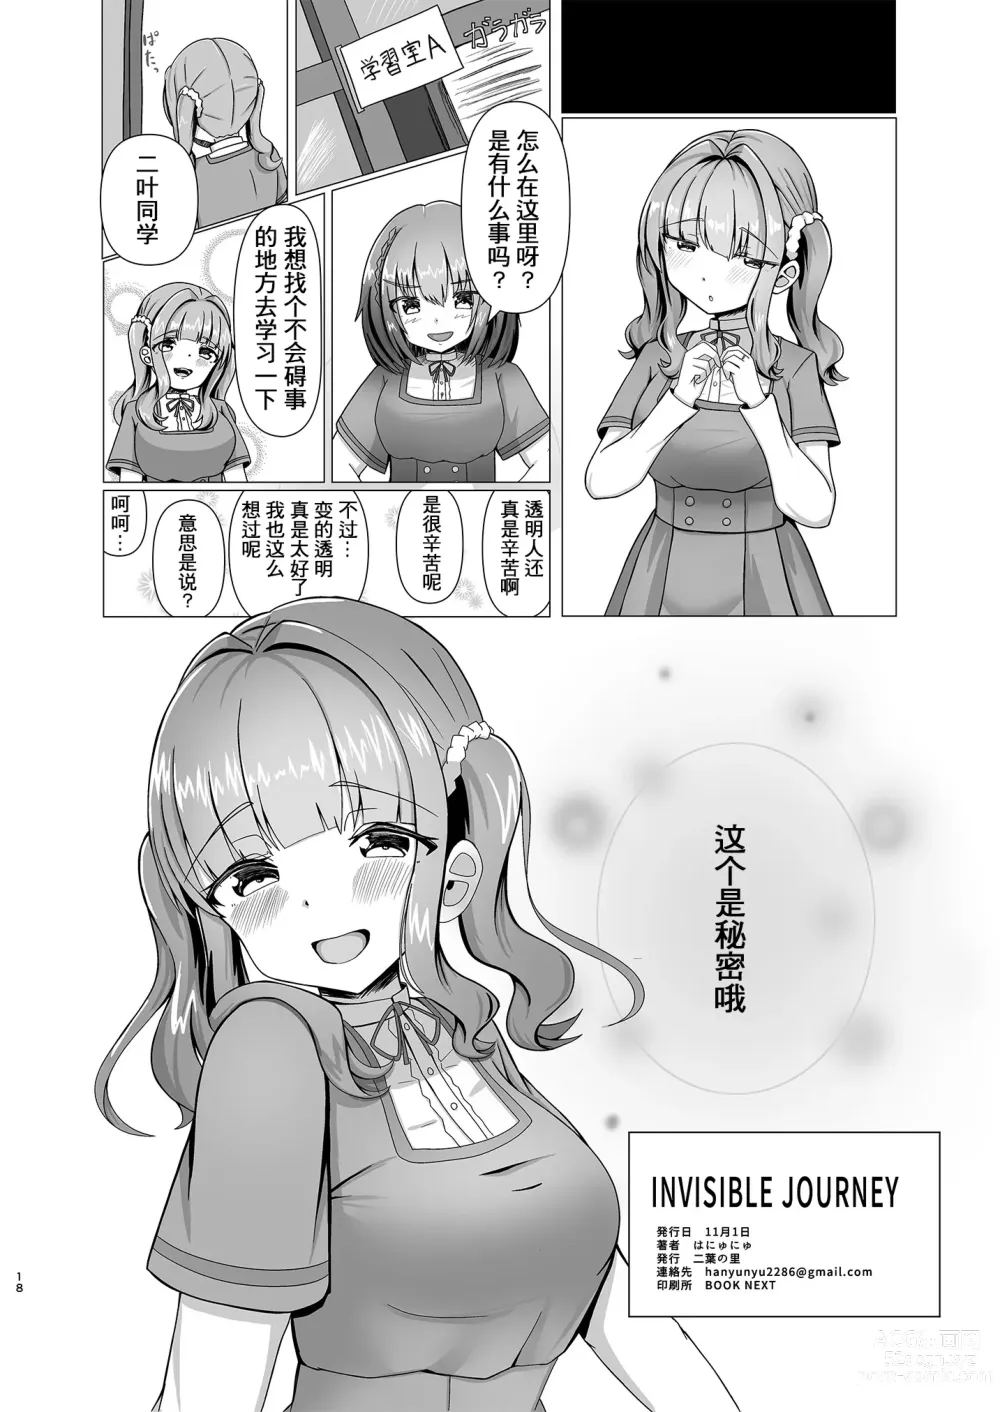 Page 17 of doujinshi INVISIBLE JOURNEY